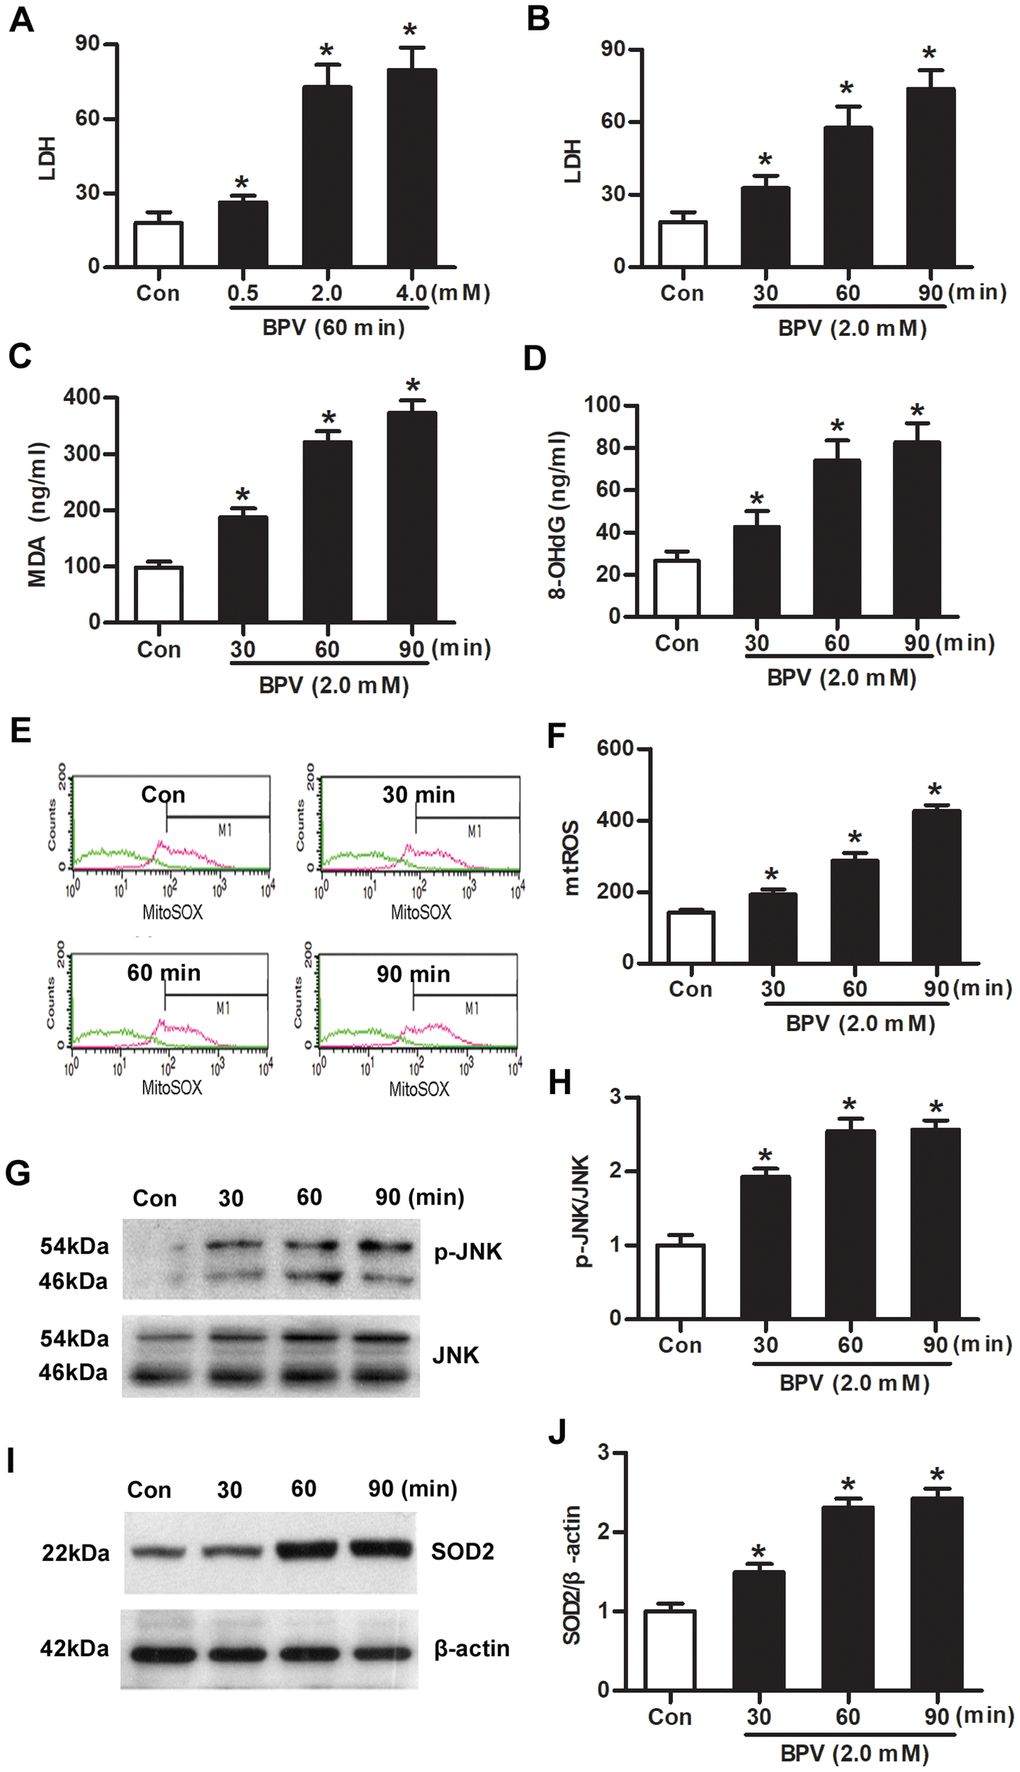 Oxidative injury, JNK phosphorylation and SOD2 transcription were elevated in SH-SY5Y cells treated with BPV. (A) LDH in cells treated with different concentration (0.5, 2.0, 4.0 mM) of BPV for 60 min; (B) LDH in cells treated with 2.0 mM BPV for 30, 60, or 90 min.; (C, D) MDA and 8-OHdG production in cells treated with 2.0 mM BPV for 30, 60, or 90 min; (E, F) the fluorescence intensities of mtROS in cells incubation with 2.0 mM BPV for 30, 60, or 90 min; (G, H) the western blot analysis shows JNK and p-JNK in SH-SY5Y cells incubation with 2.0 mM BPV for 30, 60, or 90 min; (I, J) the western blot analysis showed SOD2 expression in cells incubation with 2.0 mM BPV for 30, 60, or 90 min. Values are the mean± SEM of n = 3. *: P